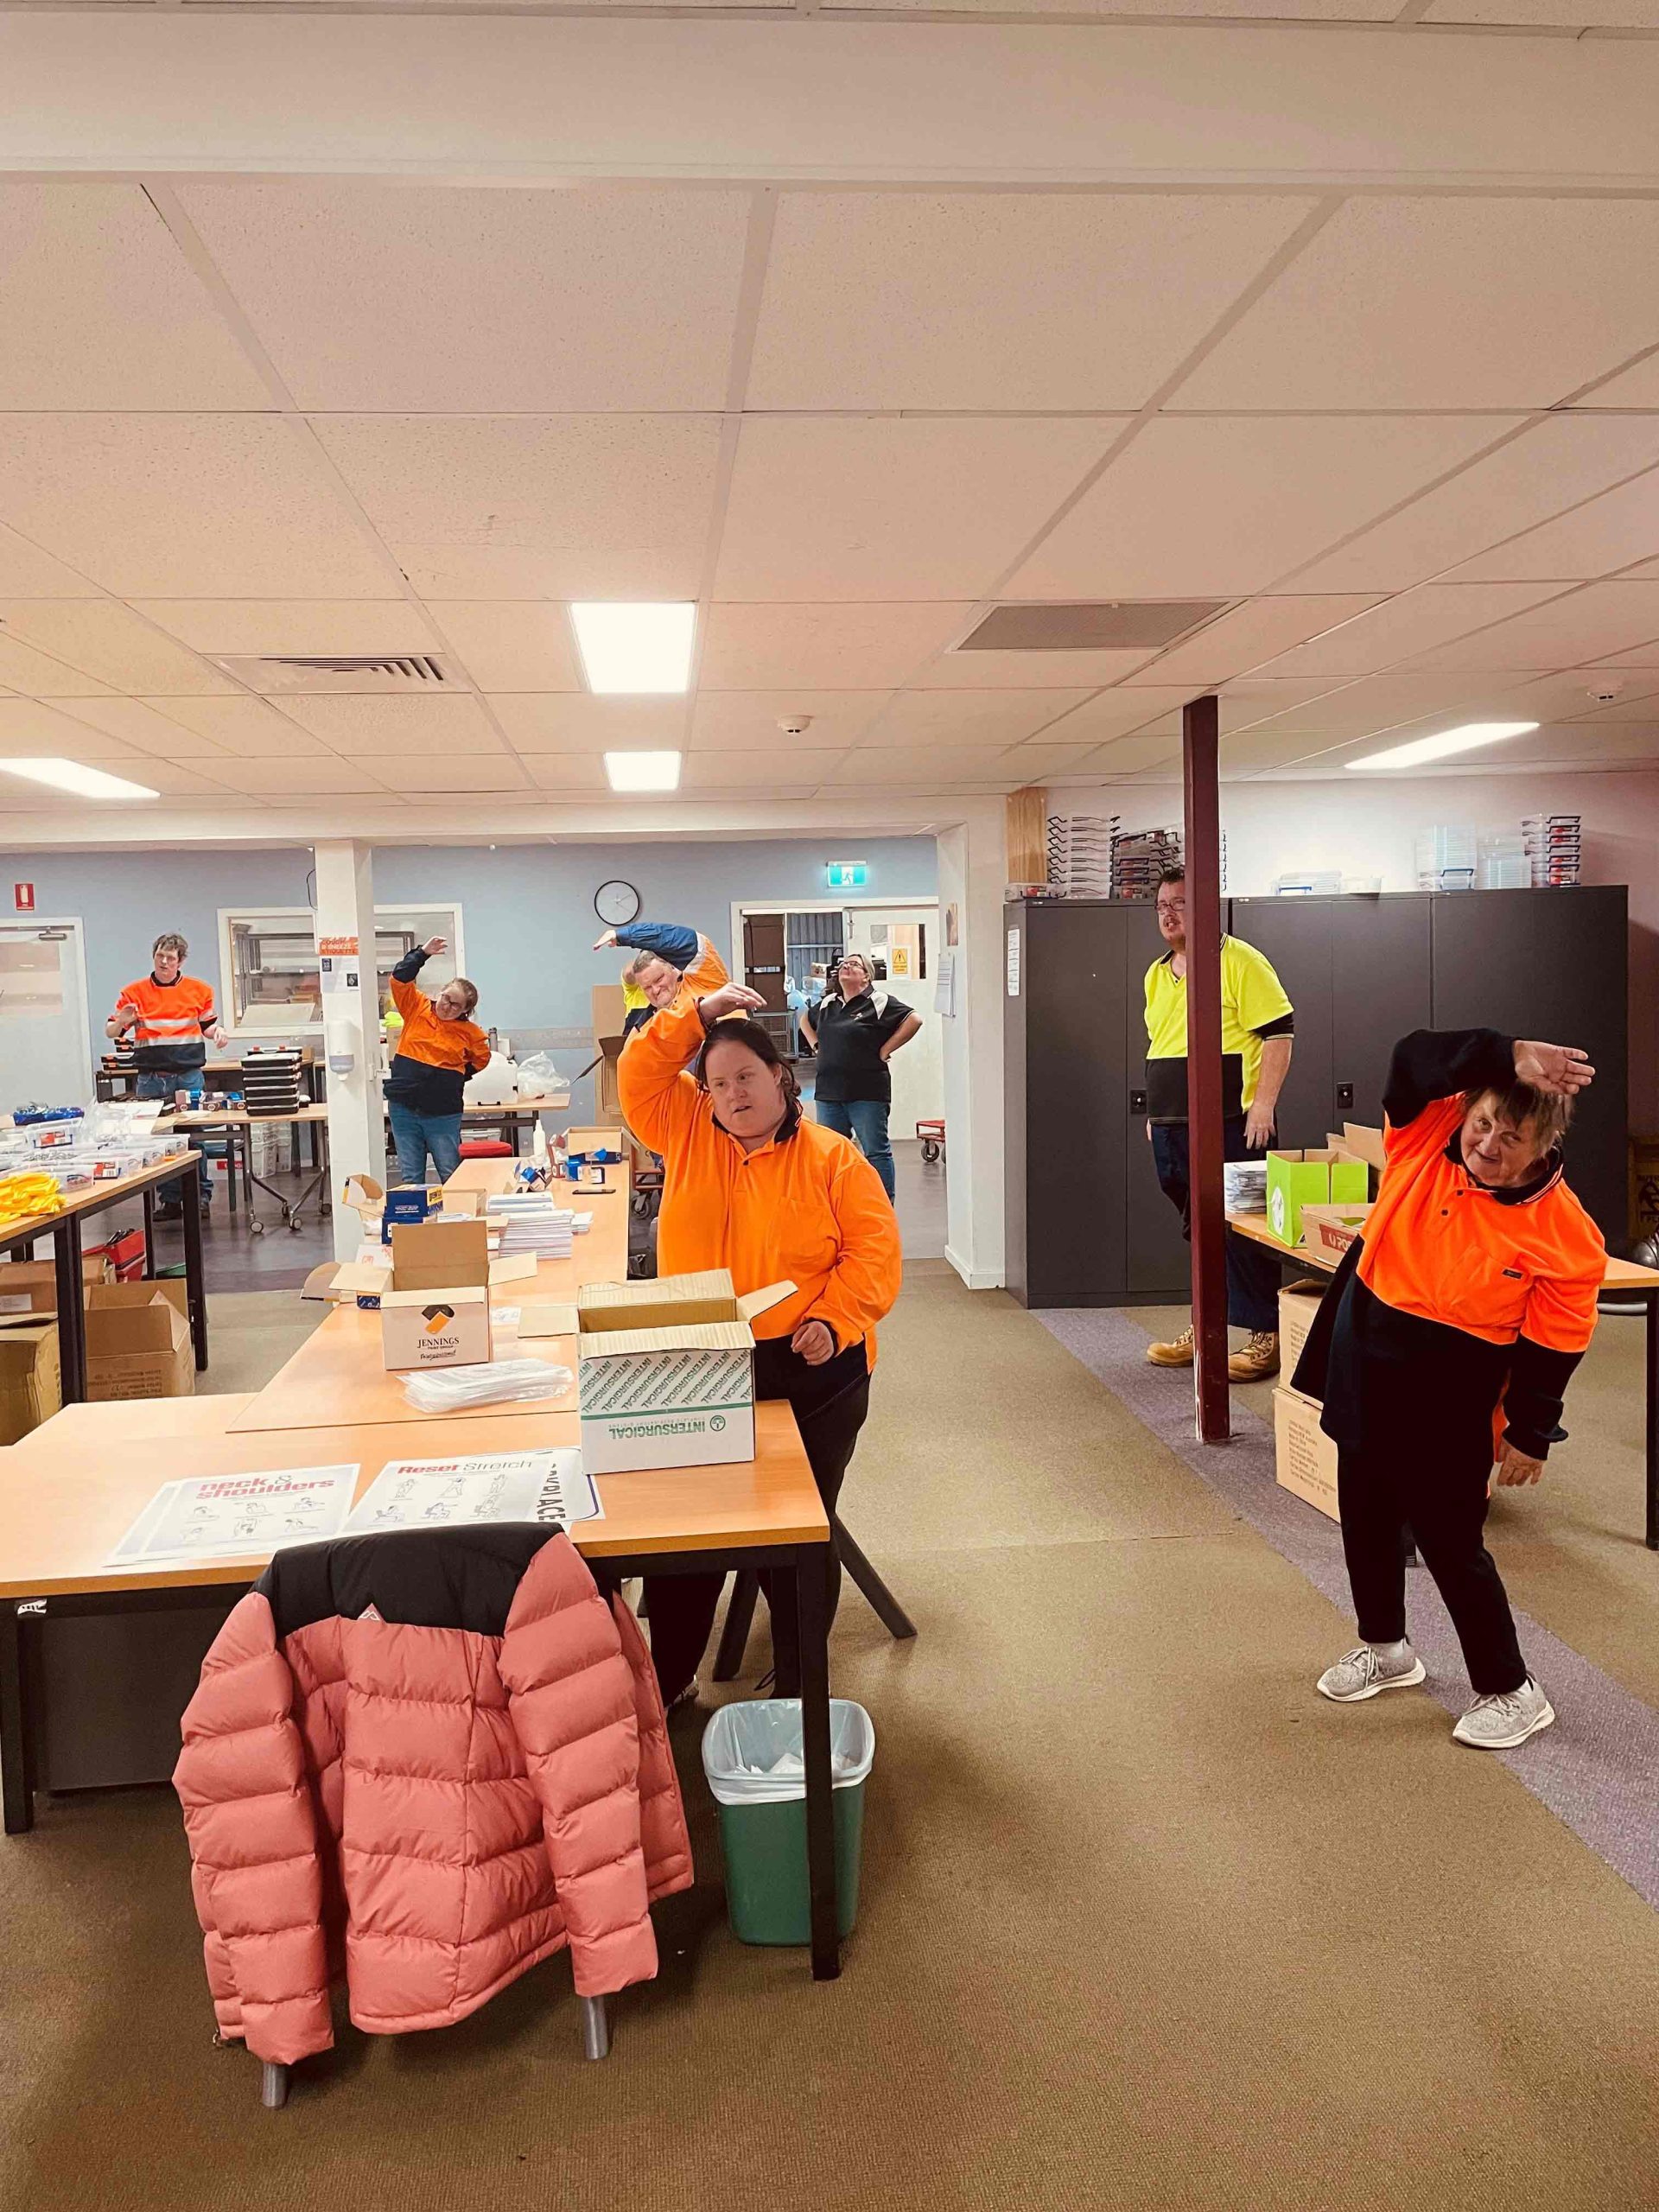 A room of men and women wearing high-vis stretching with one arm over the head.